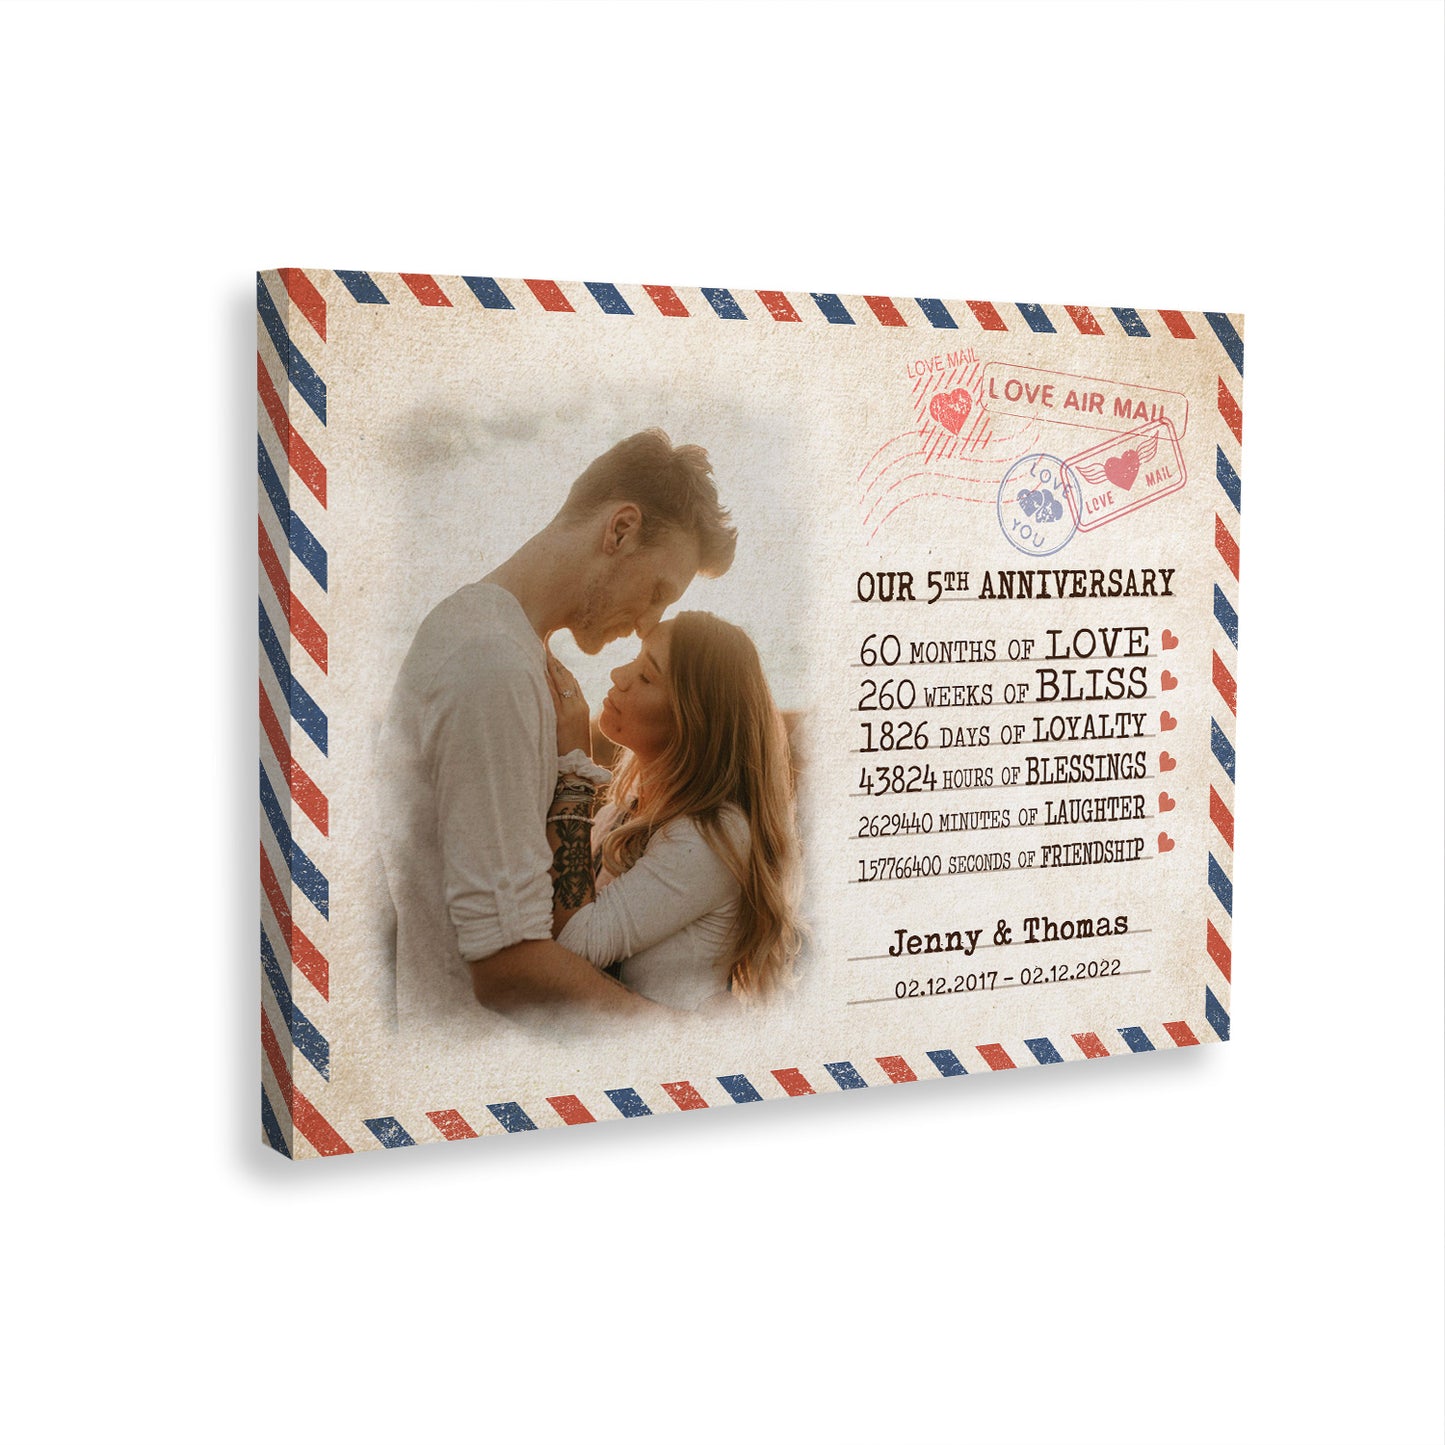 Our 5th Anniversary Letter Custom Image Canvas Valentine Gifts